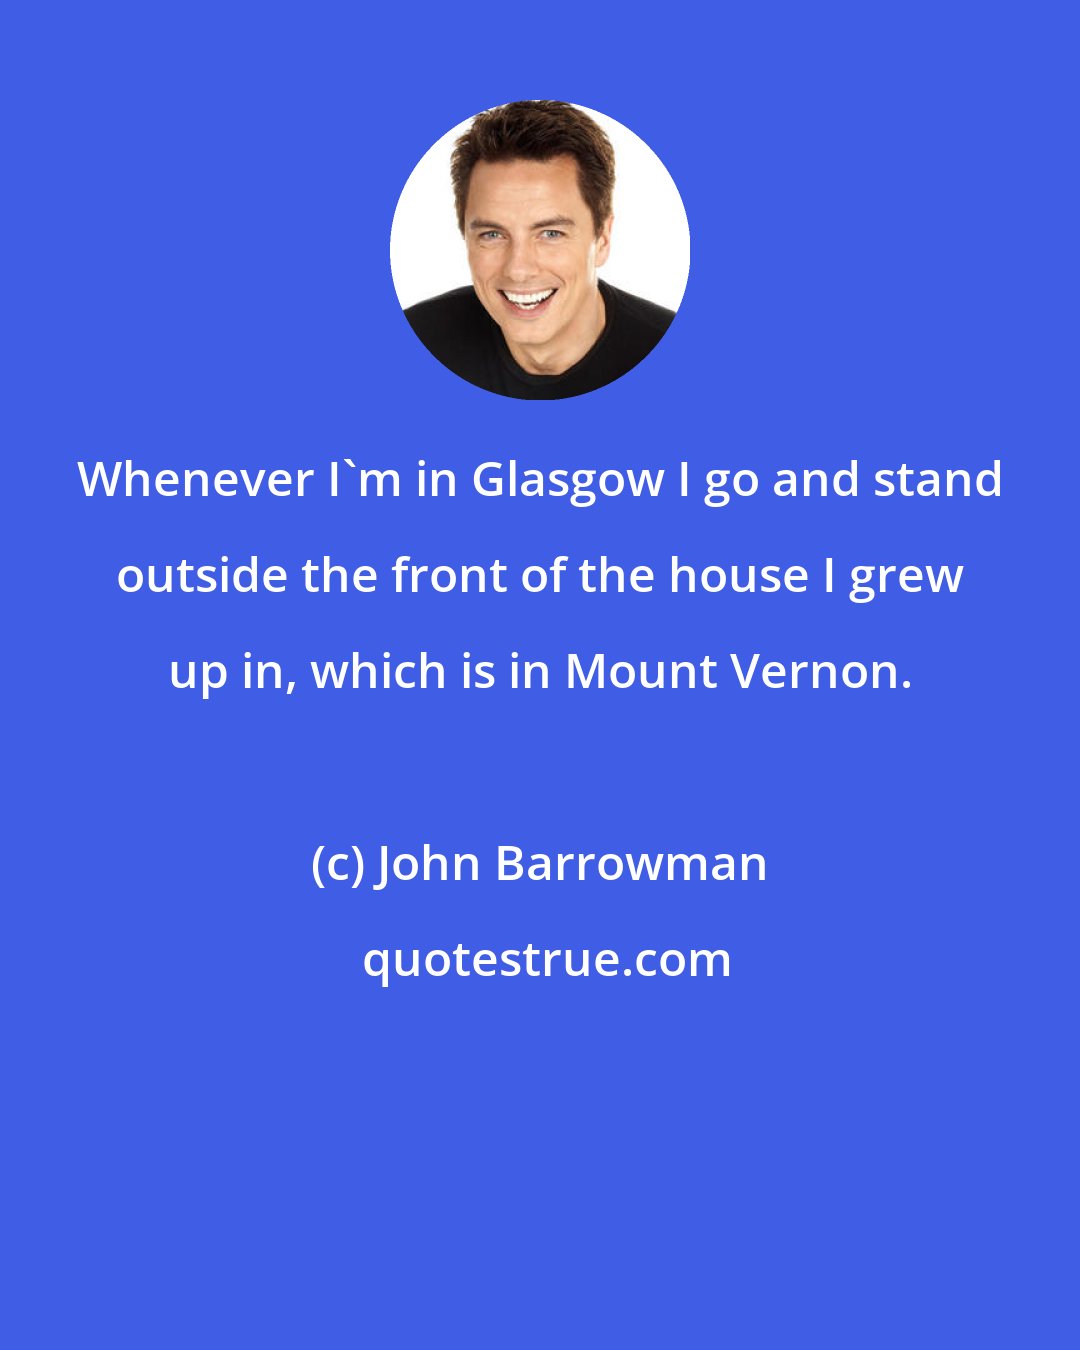 John Barrowman: Whenever I'm in Glasgow I go and stand outside the front of the house I grew up in, which is in Mount Vernon.